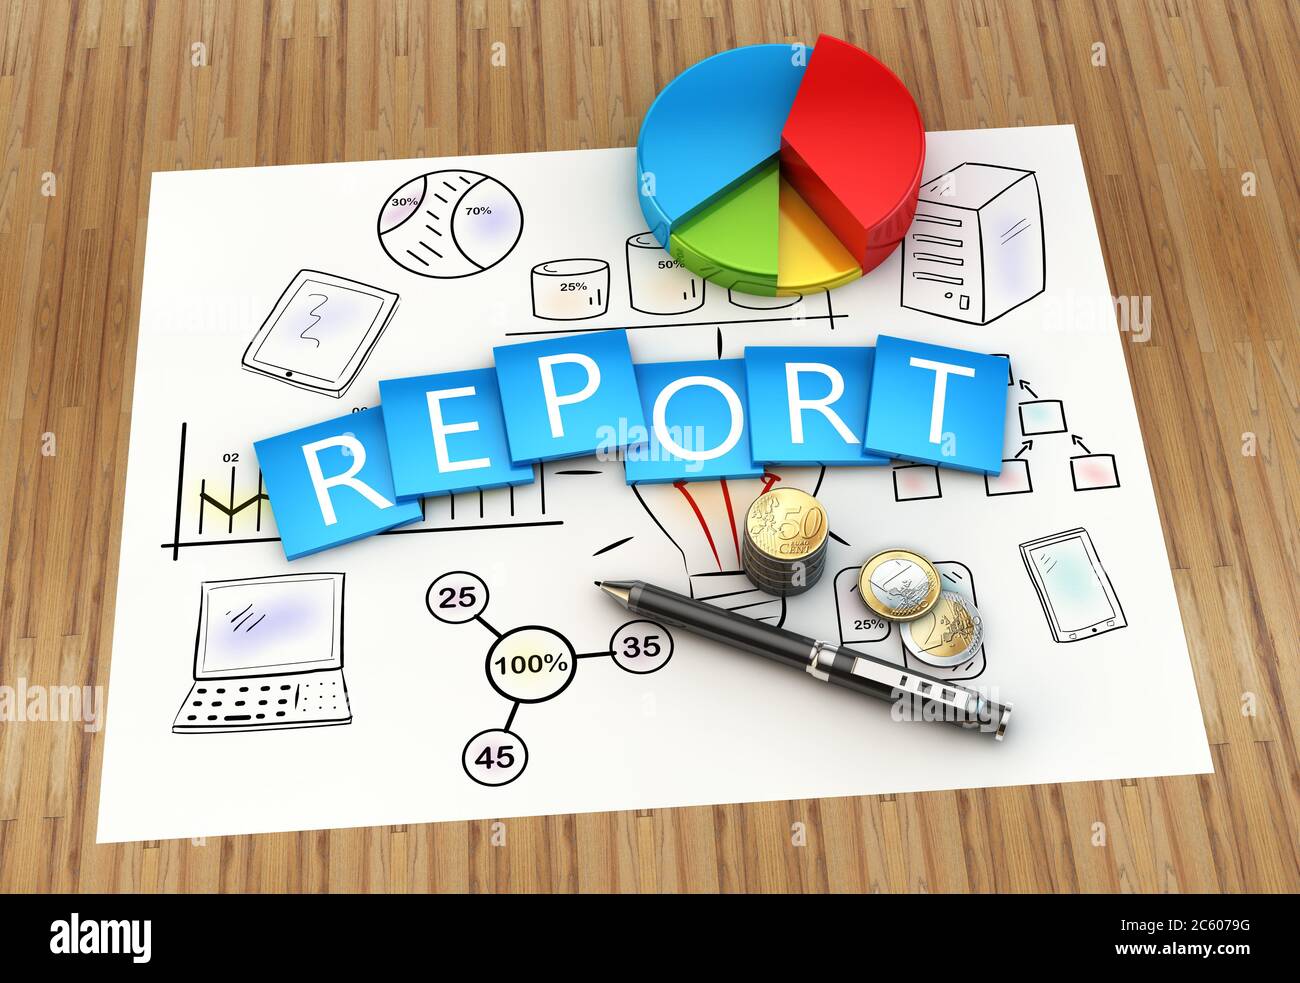 Showing business and financial report as concept. Stock Photo